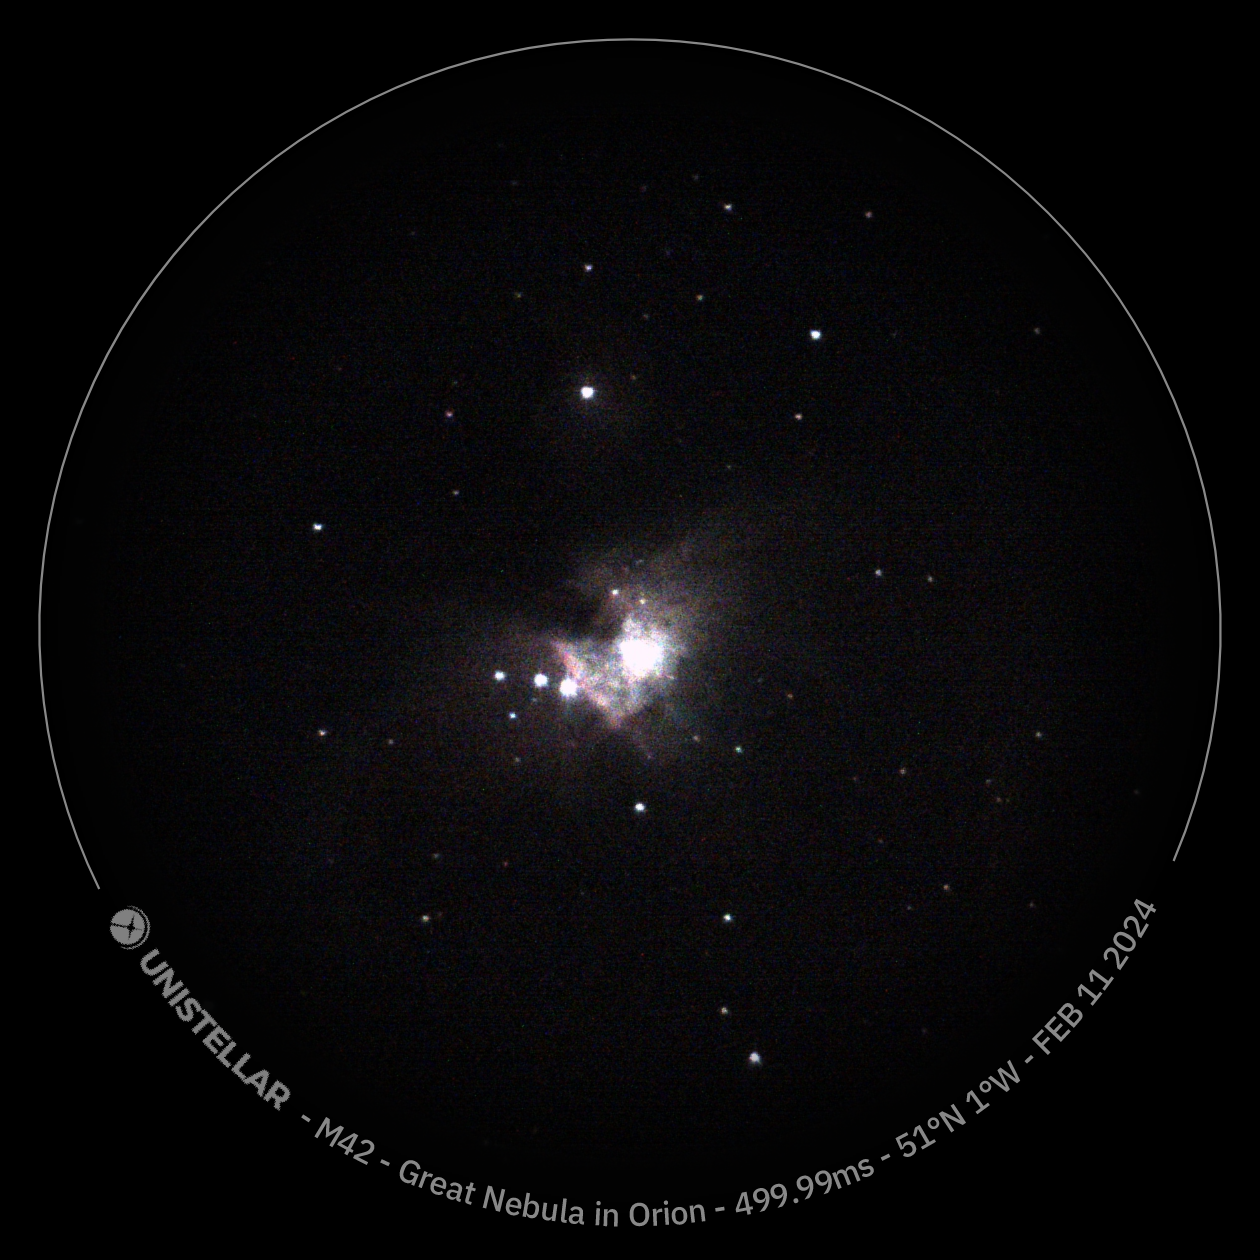 Undeveloped image of M42 Great nebula in Orion taken with the Unistellar Odyssey Pro